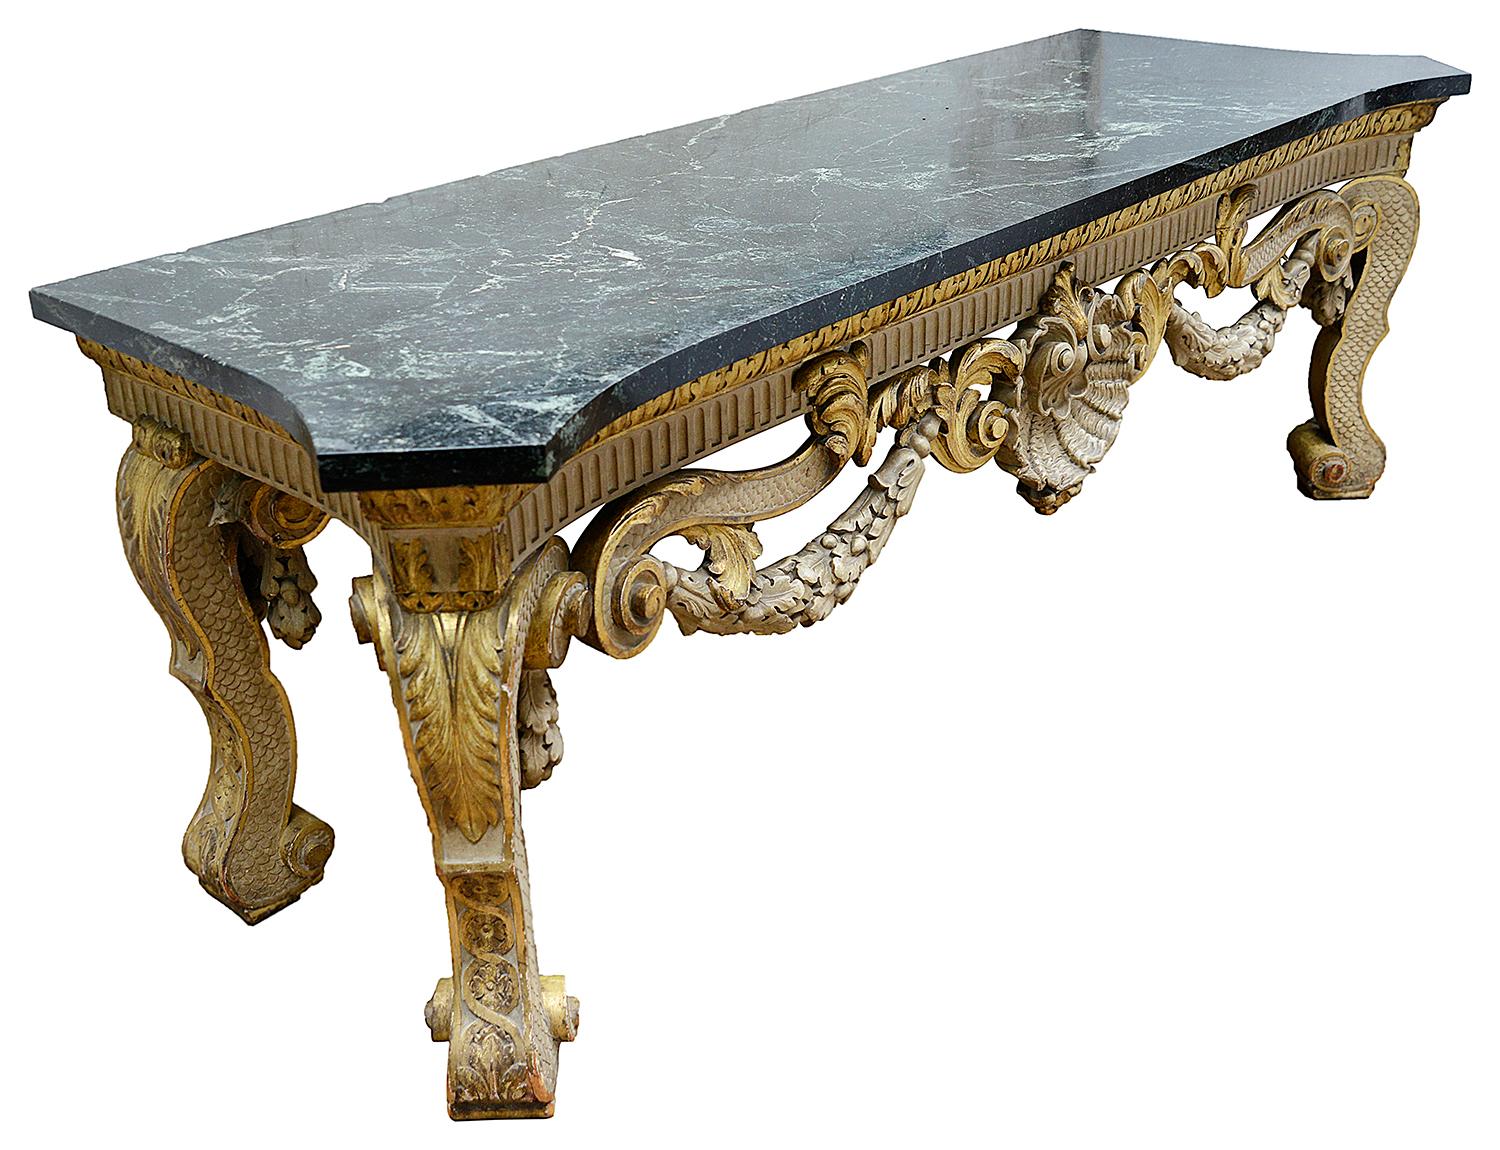 A wonderfully impressive large 19th century marble topped William Kent style console table, having Ivory and gilded decoration, carved acorn swag, sea shell and scrolling foliate decoration, raised on carved cabriole legs with fish scale and carved